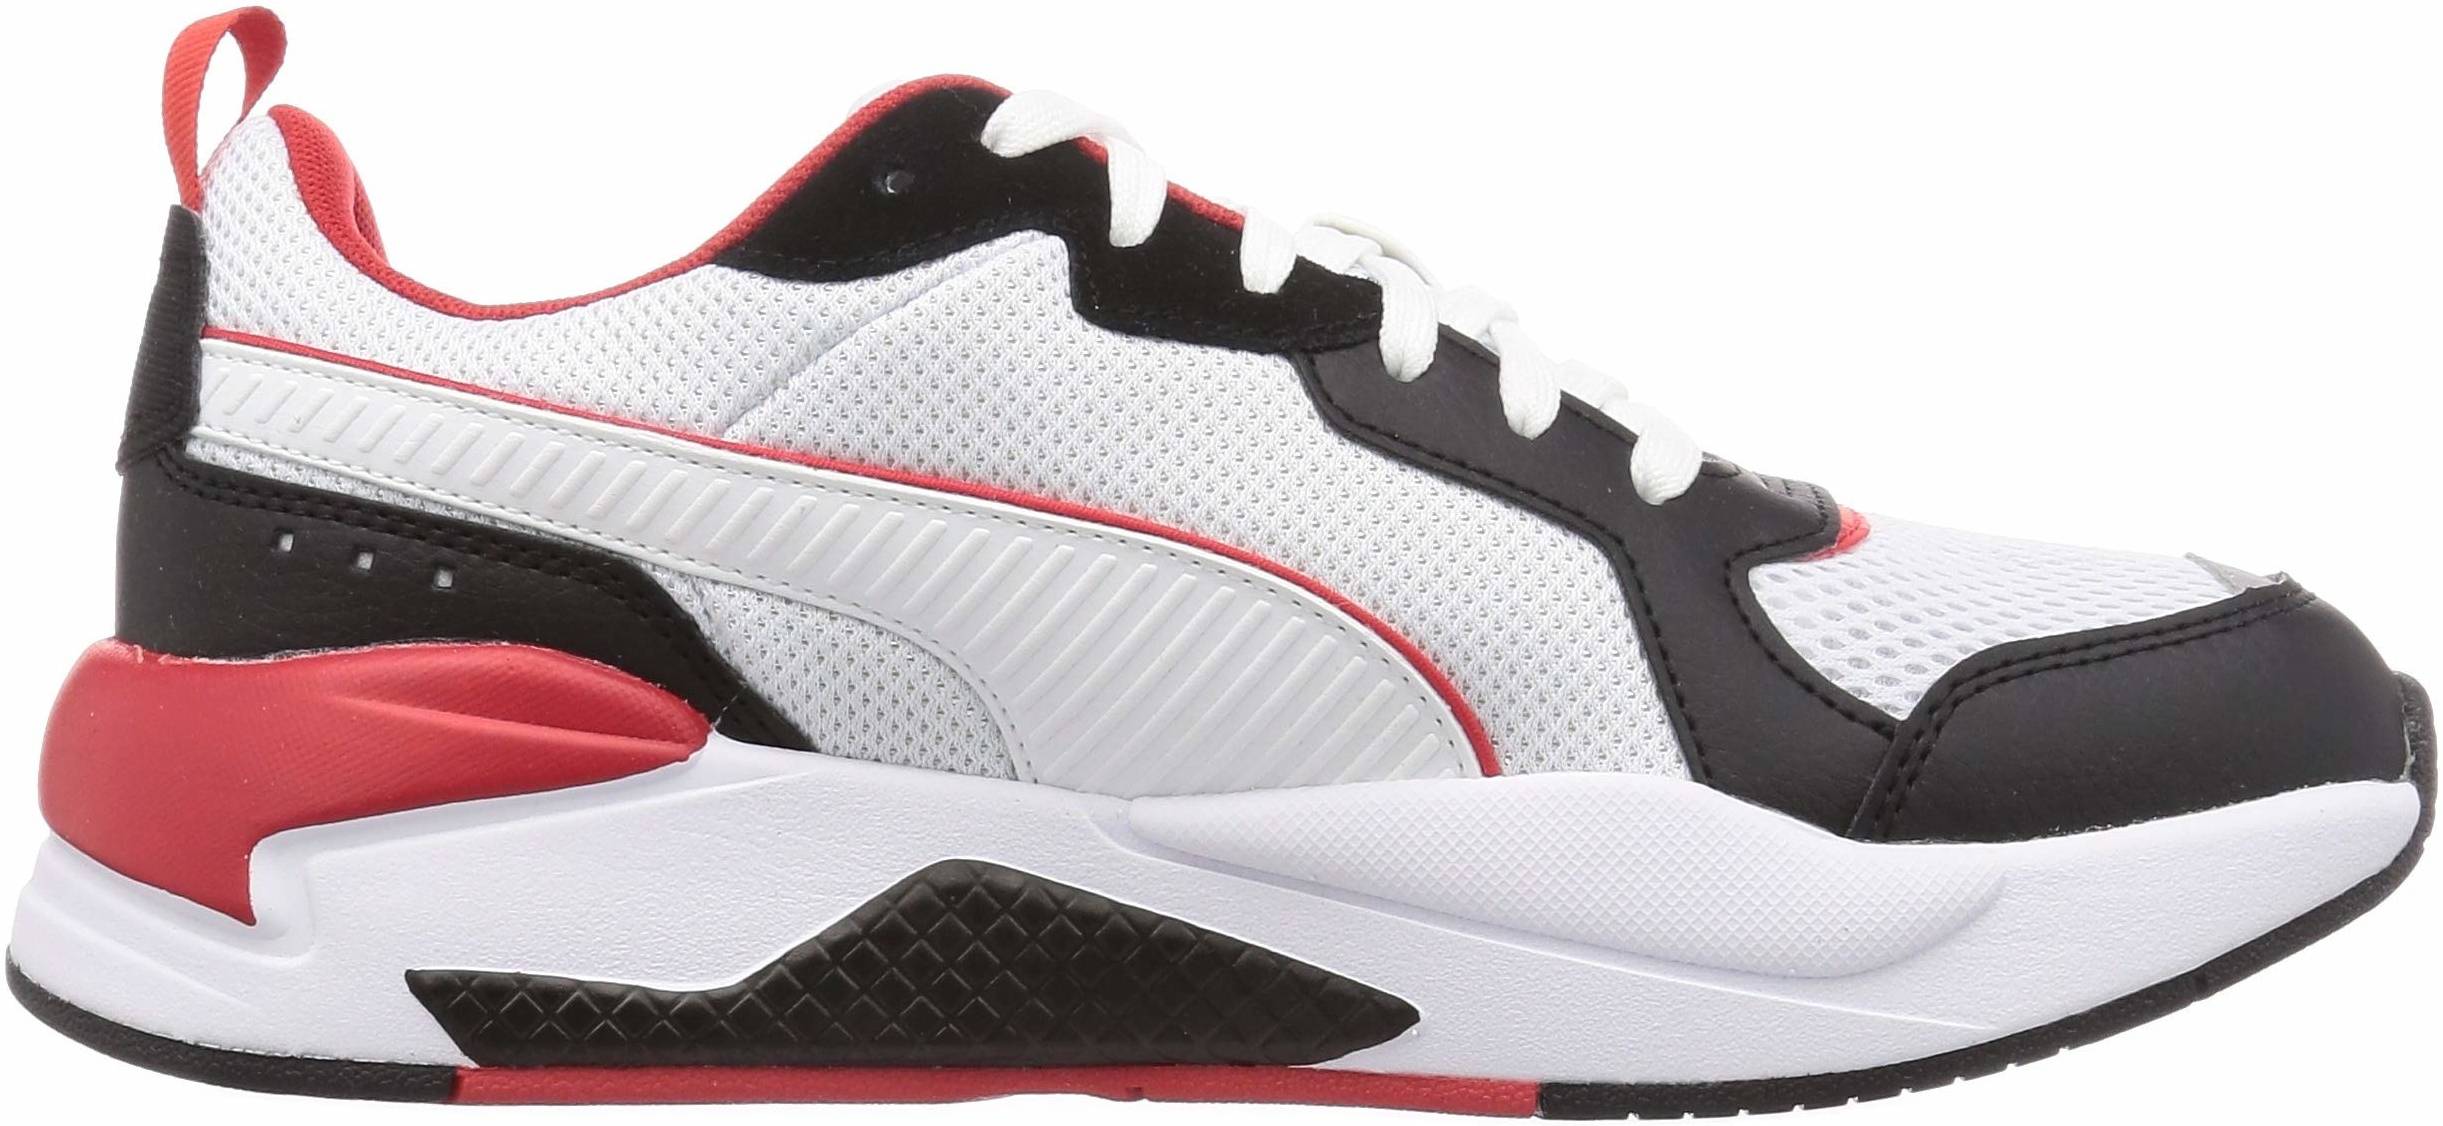 Save 50% on Puma Sneakers (285 Models 